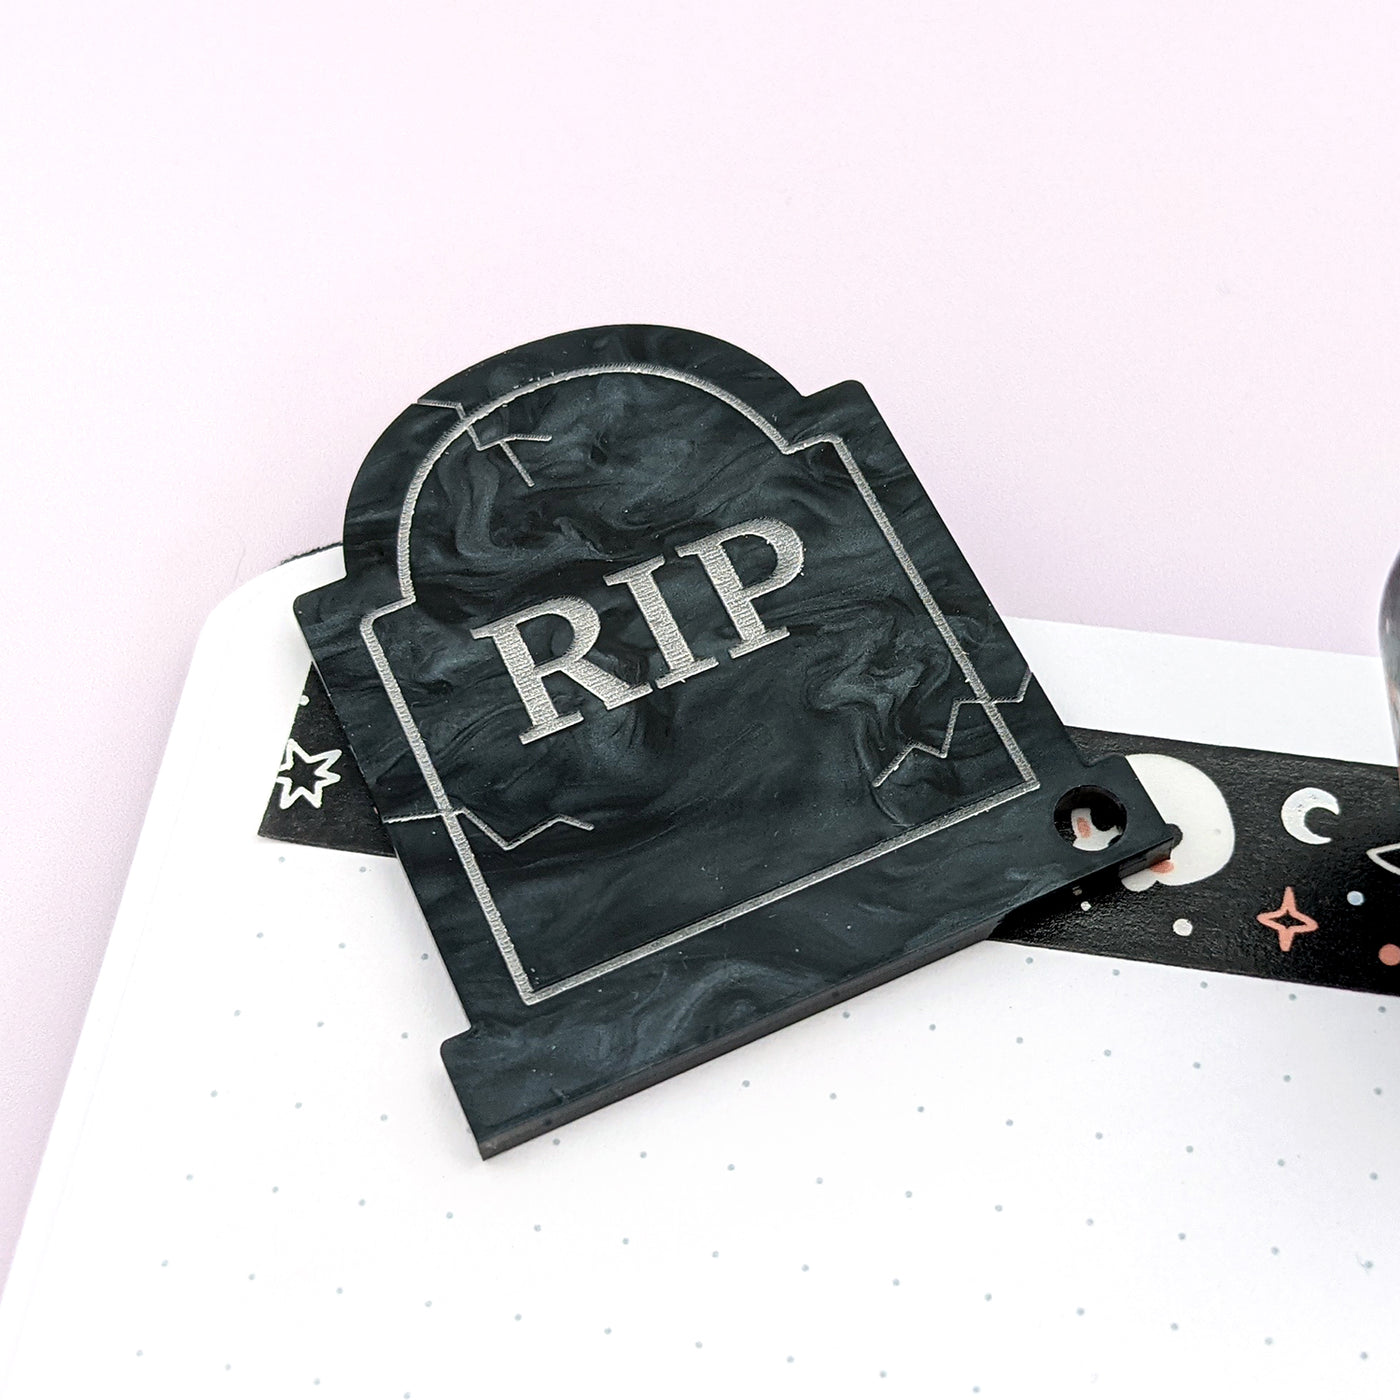 RIP (Gravestone) Washi Cutter by Fox and Cactus